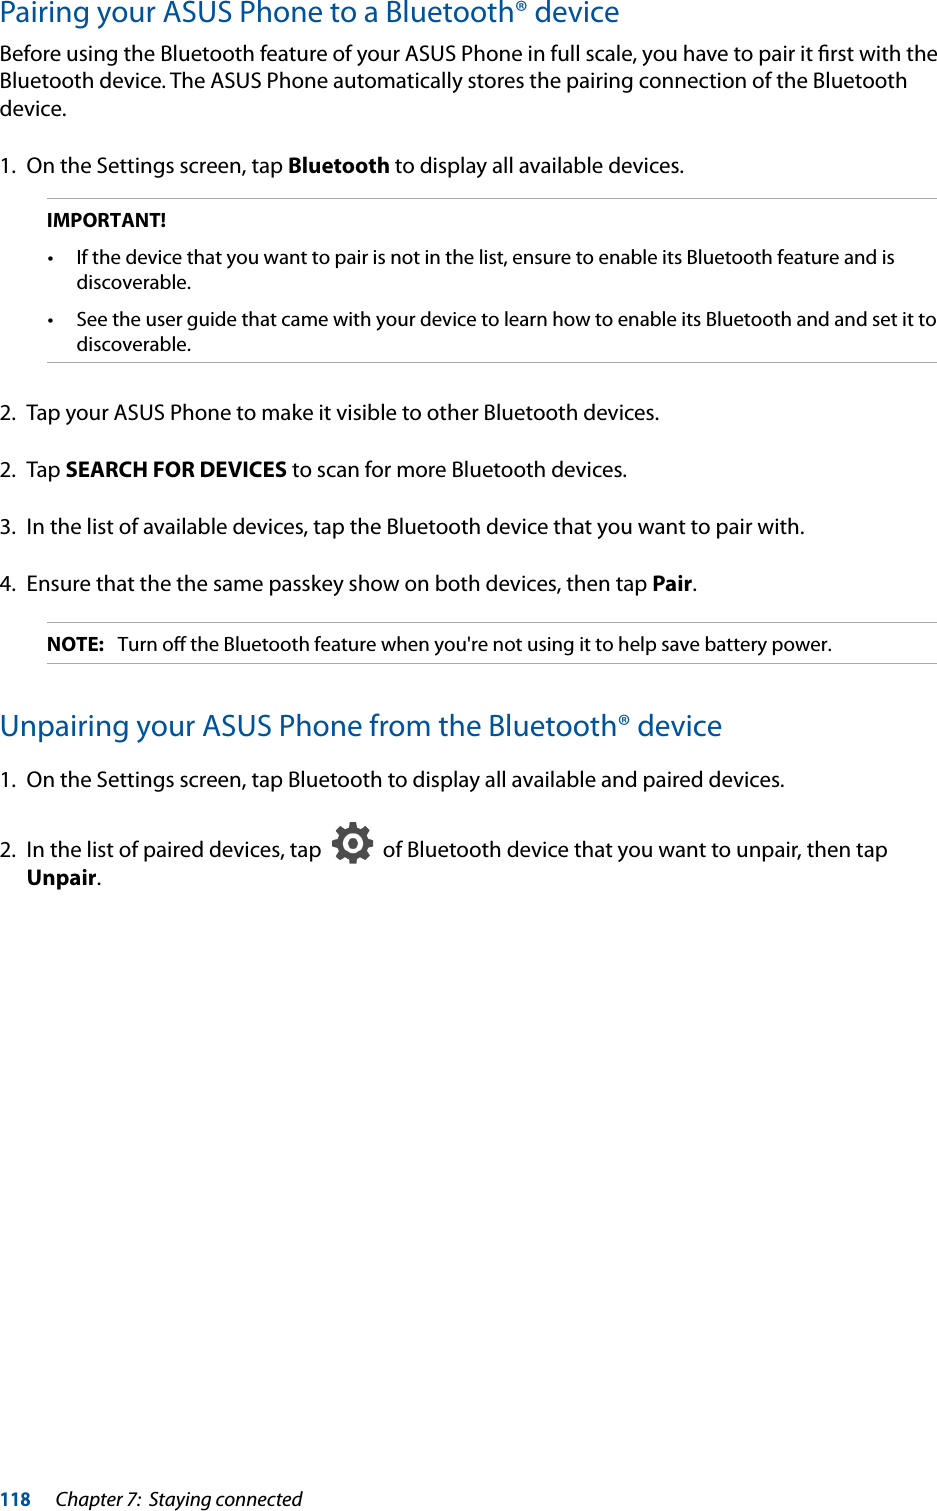 118Chapter 7:  Staying connectedPairing your ASUS Phone to a Bluetooth® deviceBefore using the Bluetooth feature of your ASUS Phone in full scale, you have to pair it ﬁrst with the Bluetooth device. The ASUS Phone automatically stores the pairing connection of the Bluetooth device.1.  On the Settings screen, tap Bluetooth to display all available devices.IMPORTANT! discoverable. discoverable.2.  Tap your ASUS Phone to make it visible to other Bluetooth devices.2. Tap SEARCH FOR DEVICES to scan for more Bluetooth devices.3.  In the list of available devices, tap the Bluetooth device that you want to pair with. 4.  Ensure that the the same passkey show on both devices, then tap Pair. NOTE:  Turn off the Bluetooth feature when you&apos;re not using it to help save battery power.Unpairing your ASUS Phone from the Bluetooth® device1.  On the Settings screen, tap Bluetooth to display all available and paired devices.2.  In the list of paired devices, tap     of Bluetooth device that you want to unpair, then tap Unpair.